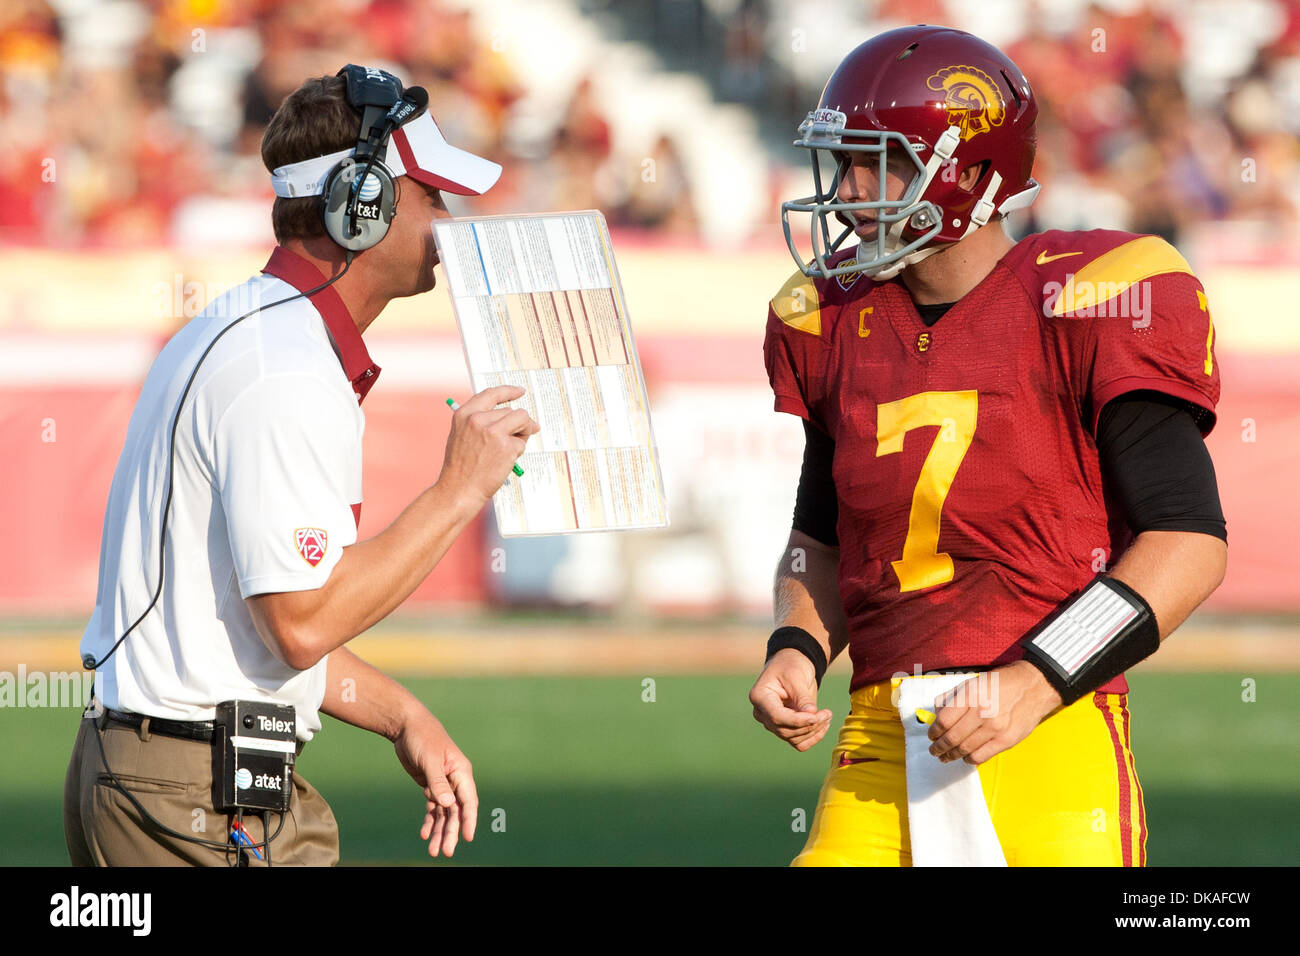 Sept. 17, 2011 - Los Angeles, California, U.S - USC Head Coach Lane Kiffin has a quick word with USC Trojans quarterback Matt Barkley #7 during the NCAA Football game between the Syracuse Oranges and the USC Trojans at Los Angeles Memorial Coliseum. USC went on to defeat Syracuse with a final score of 38-17. (Credit Image: © Brandon Parry/Southcreek Global/ZUMAPRESS.com) Stock Photo